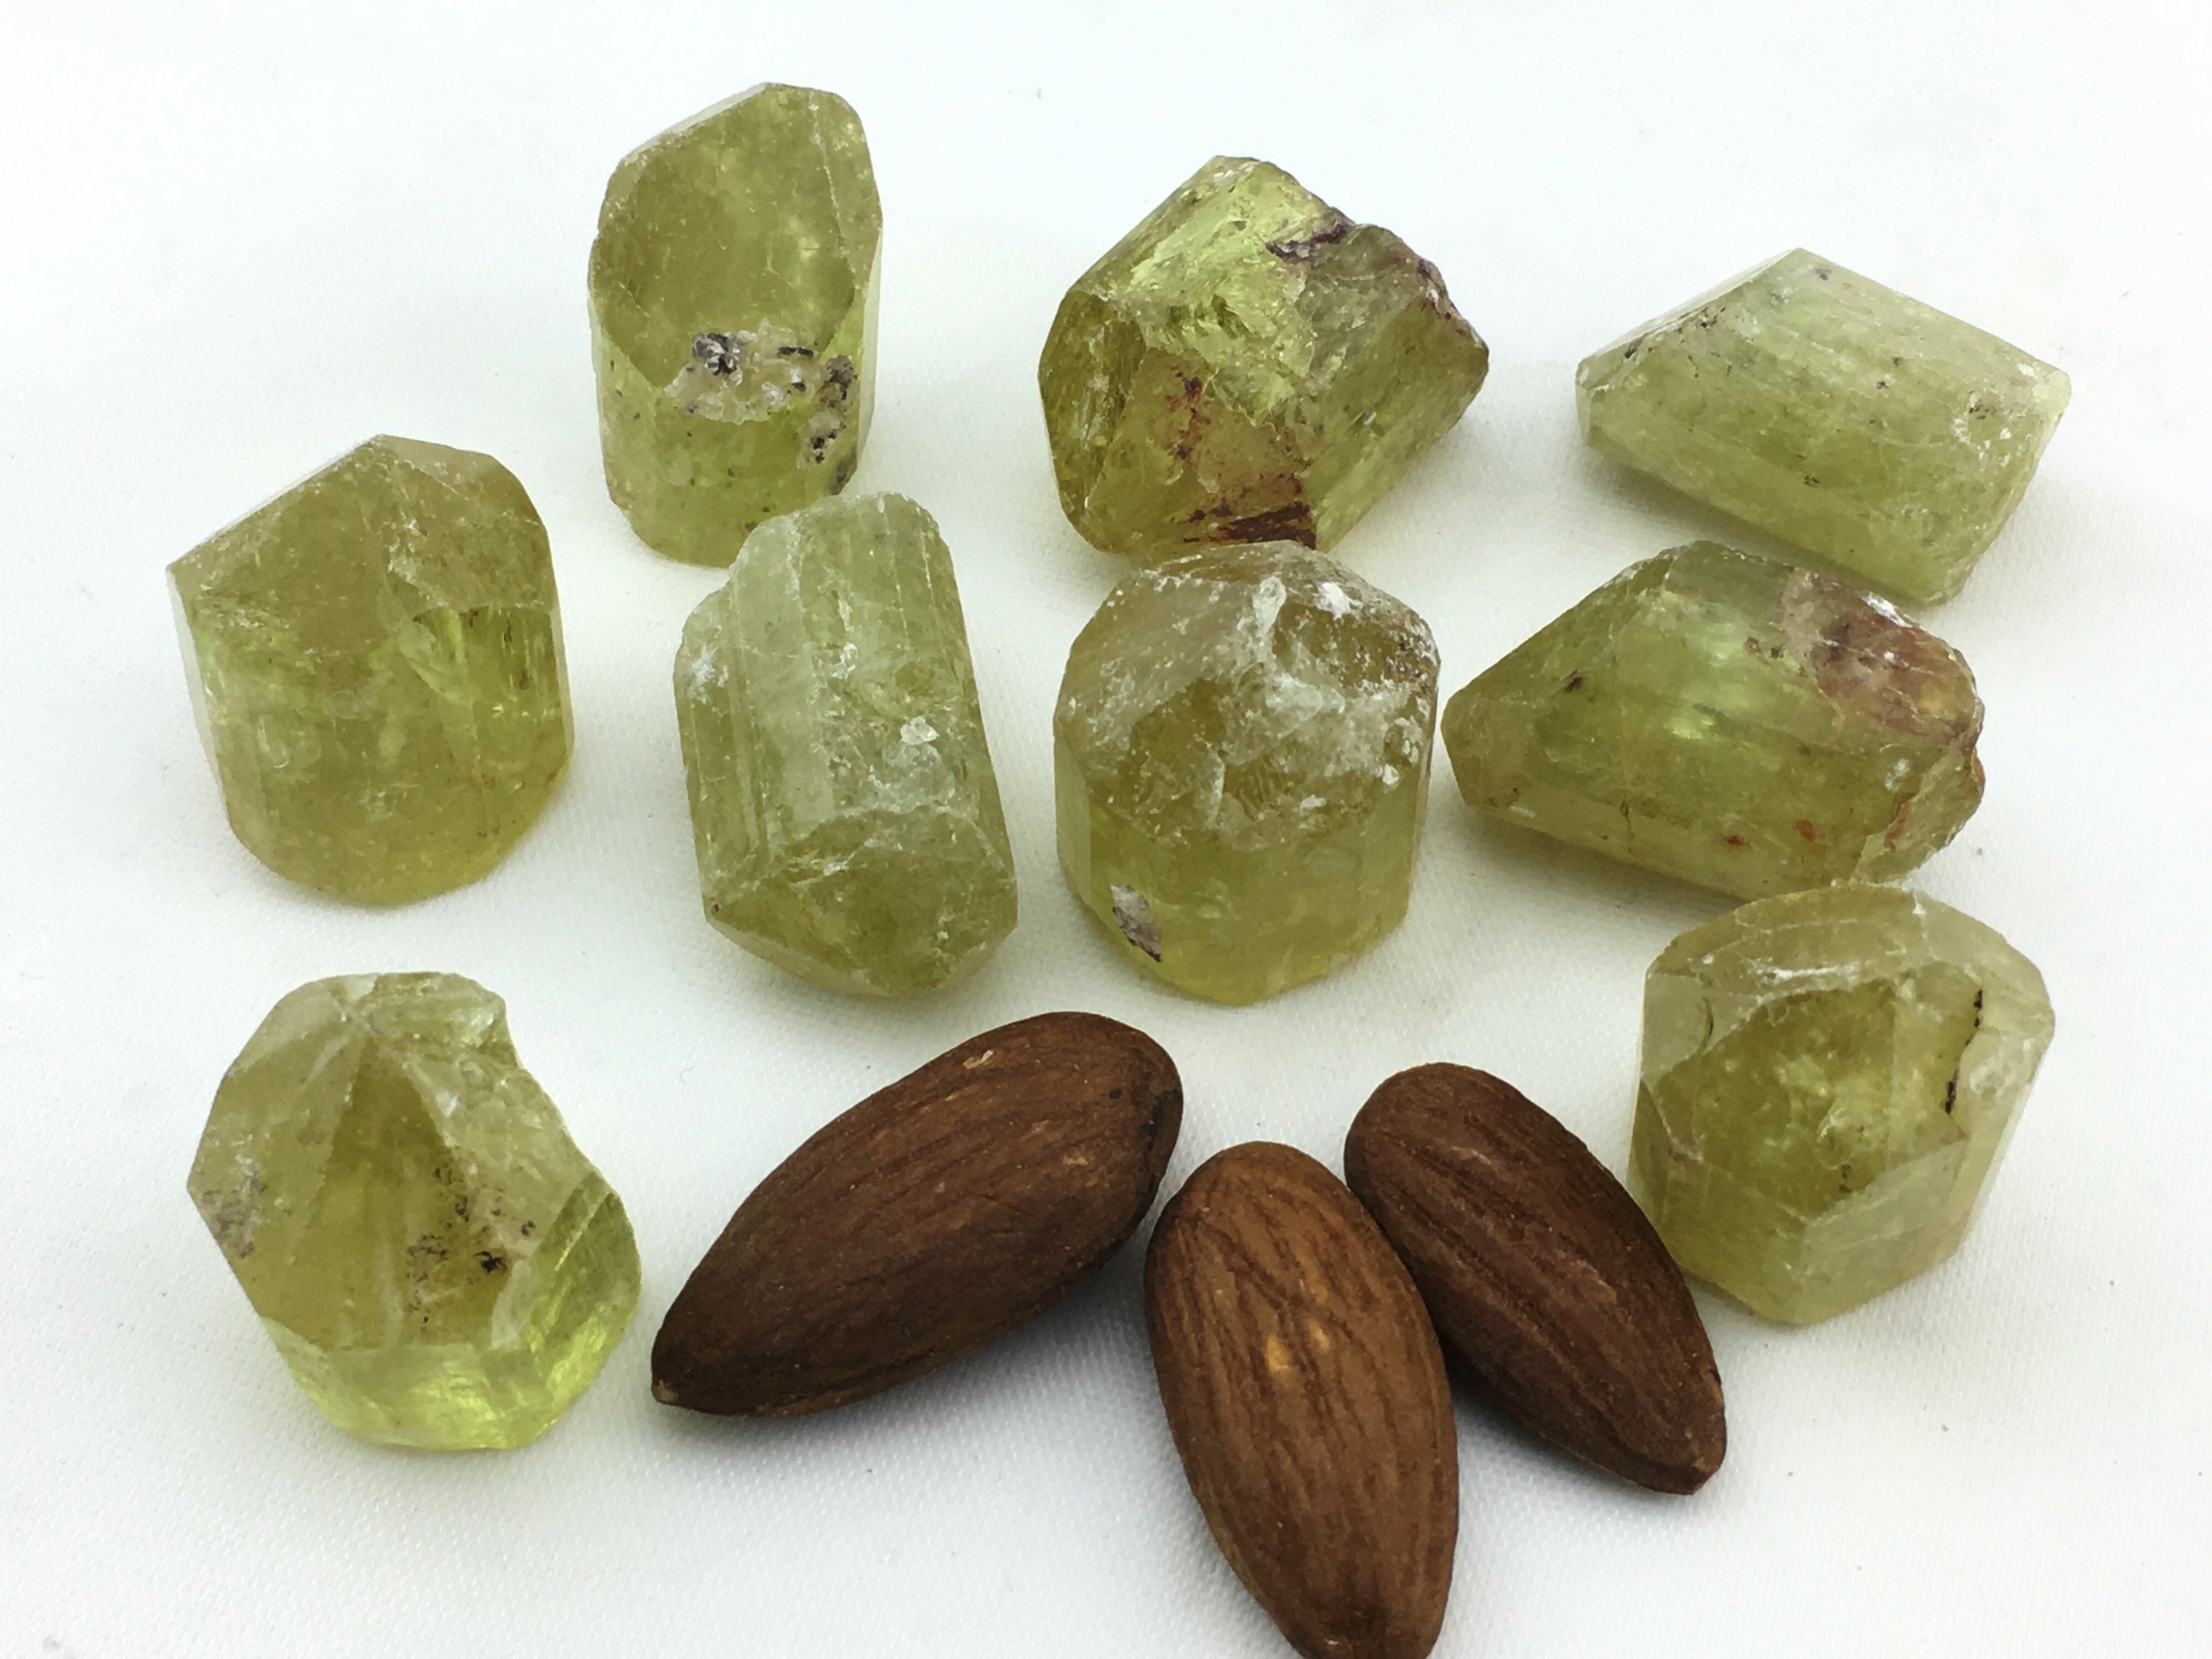 Apatite Yellow - Naturally Faceted & Terminated (15pc./Bag)